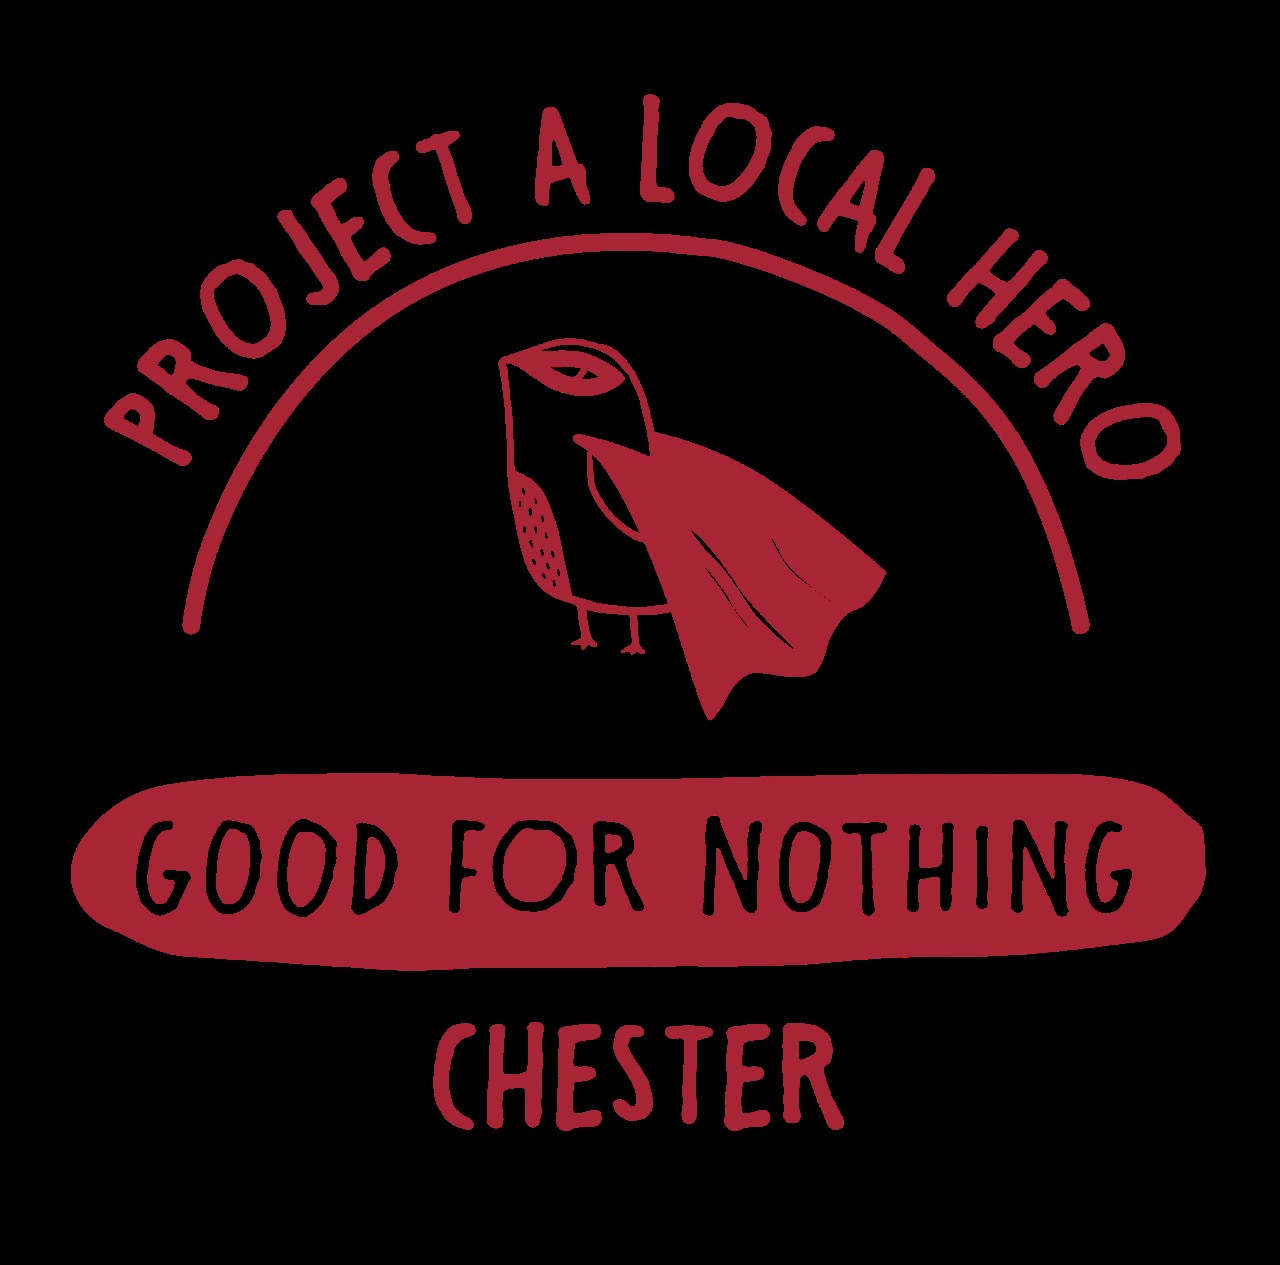 The Good for Nothing Chester Project a Local Hero campaign.